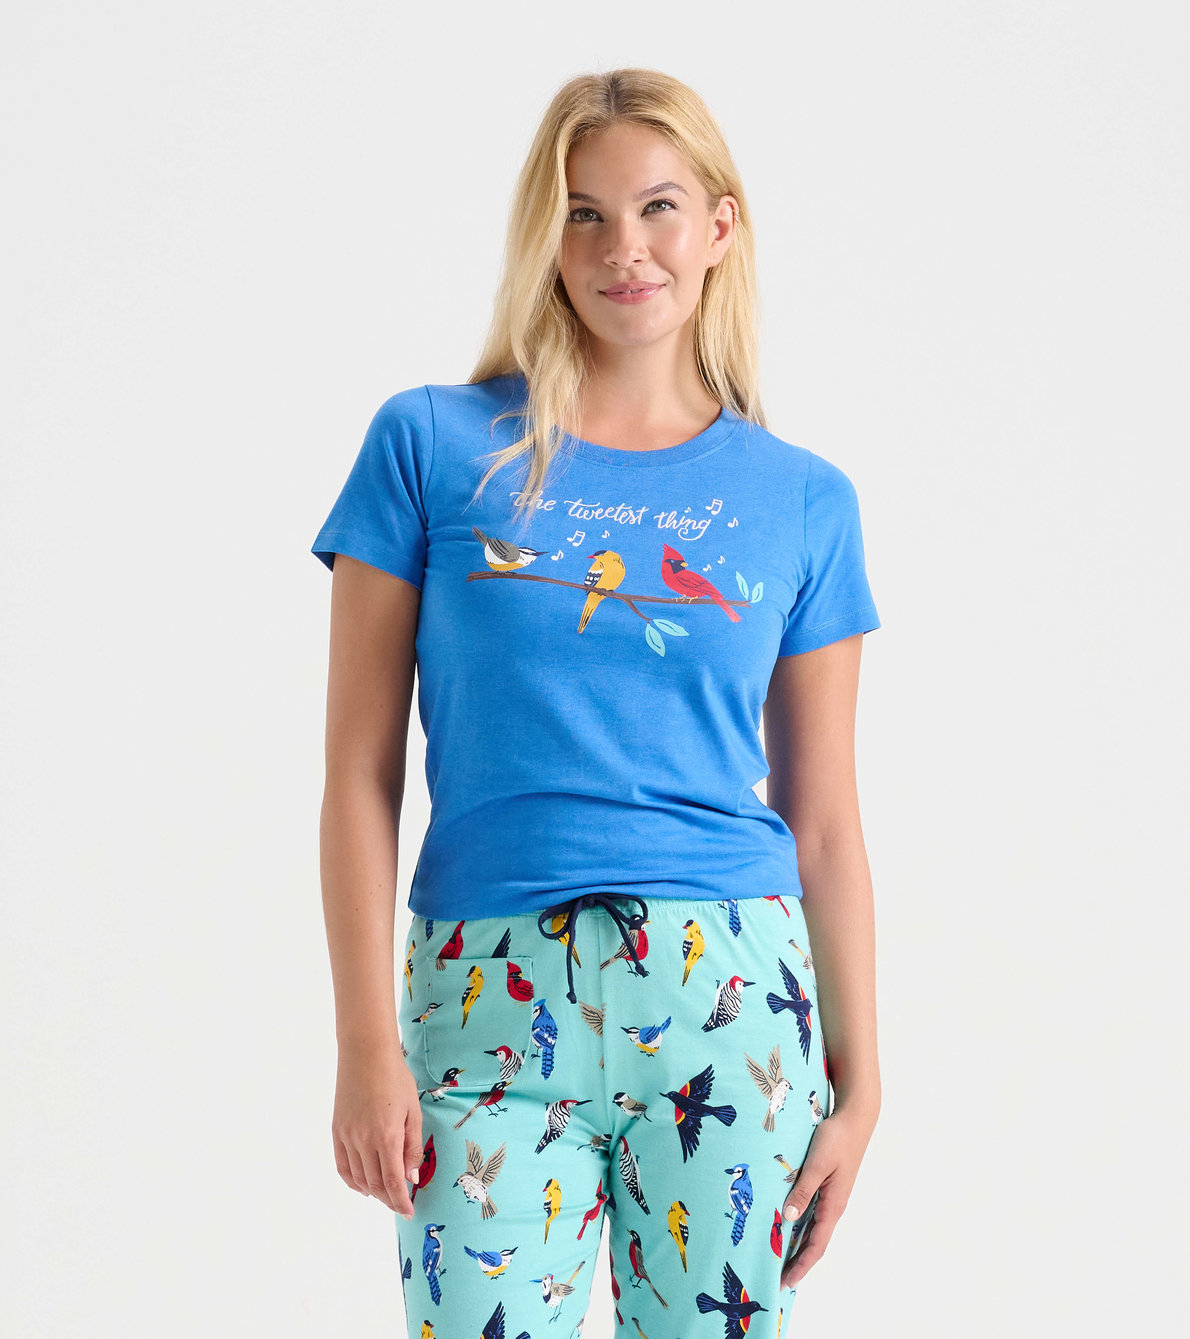 View larger image of The Tweetest Things Women's Pajama T-Shirt